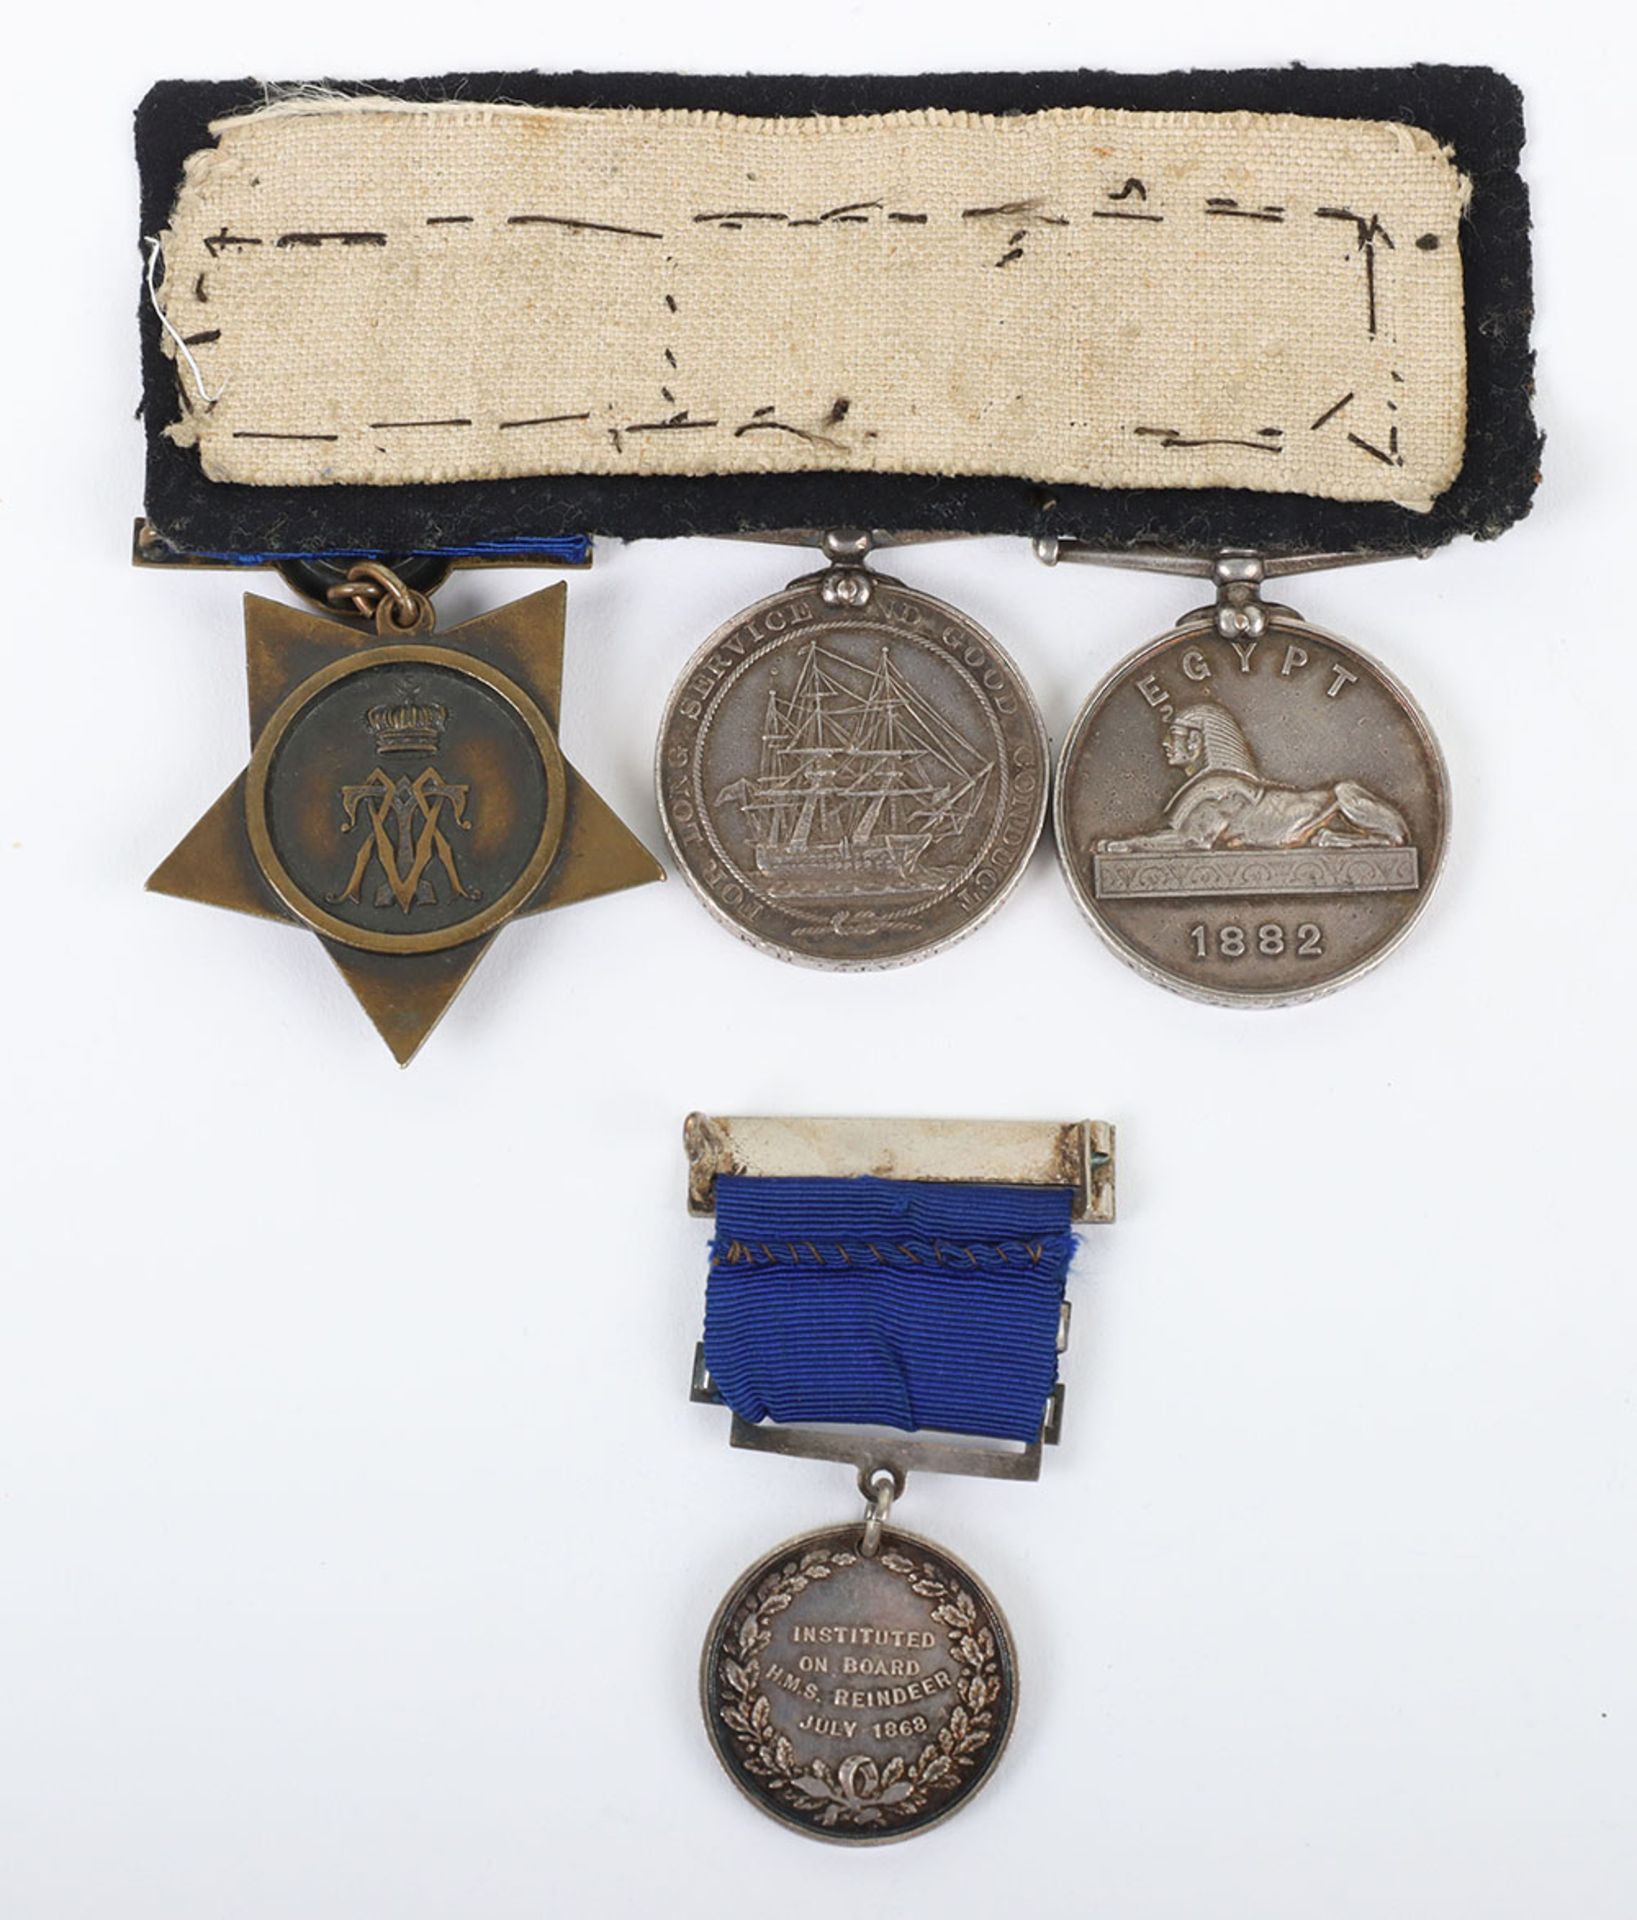 Royal Navy Long Service Medal Group of Three for Service in the 1882 Egypt Campaign - Image 6 of 9